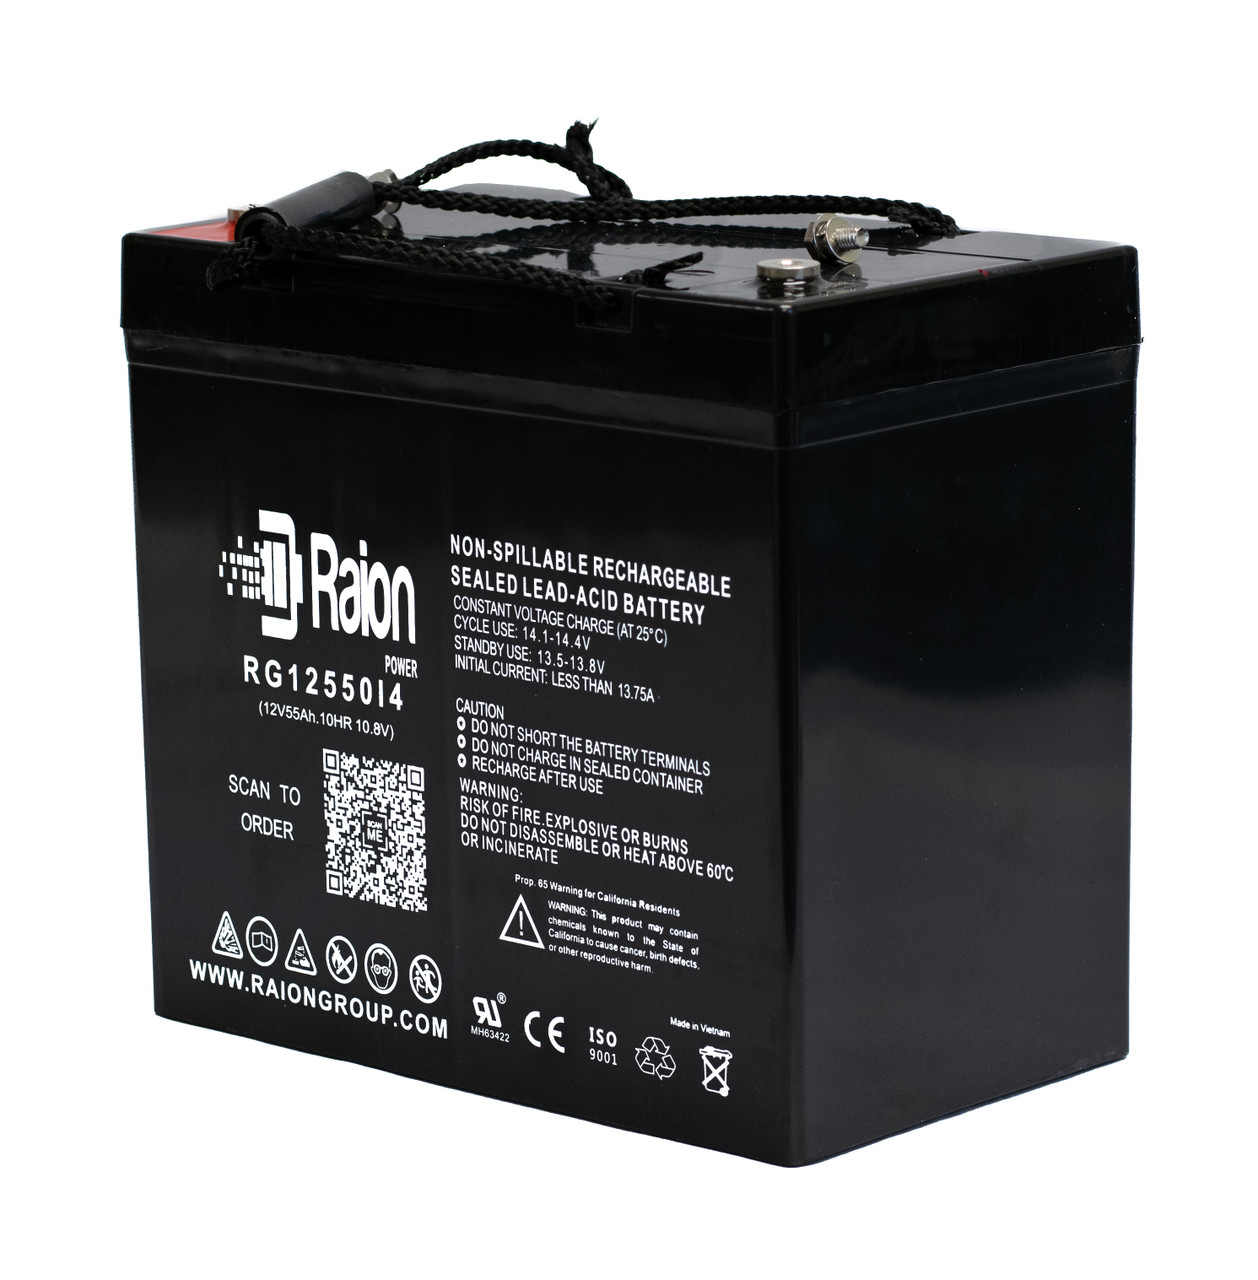 Raion Power 12V 55Ah 22NF Mobility Scooter Battery Replacement for Redman Wheelchairs 107SR